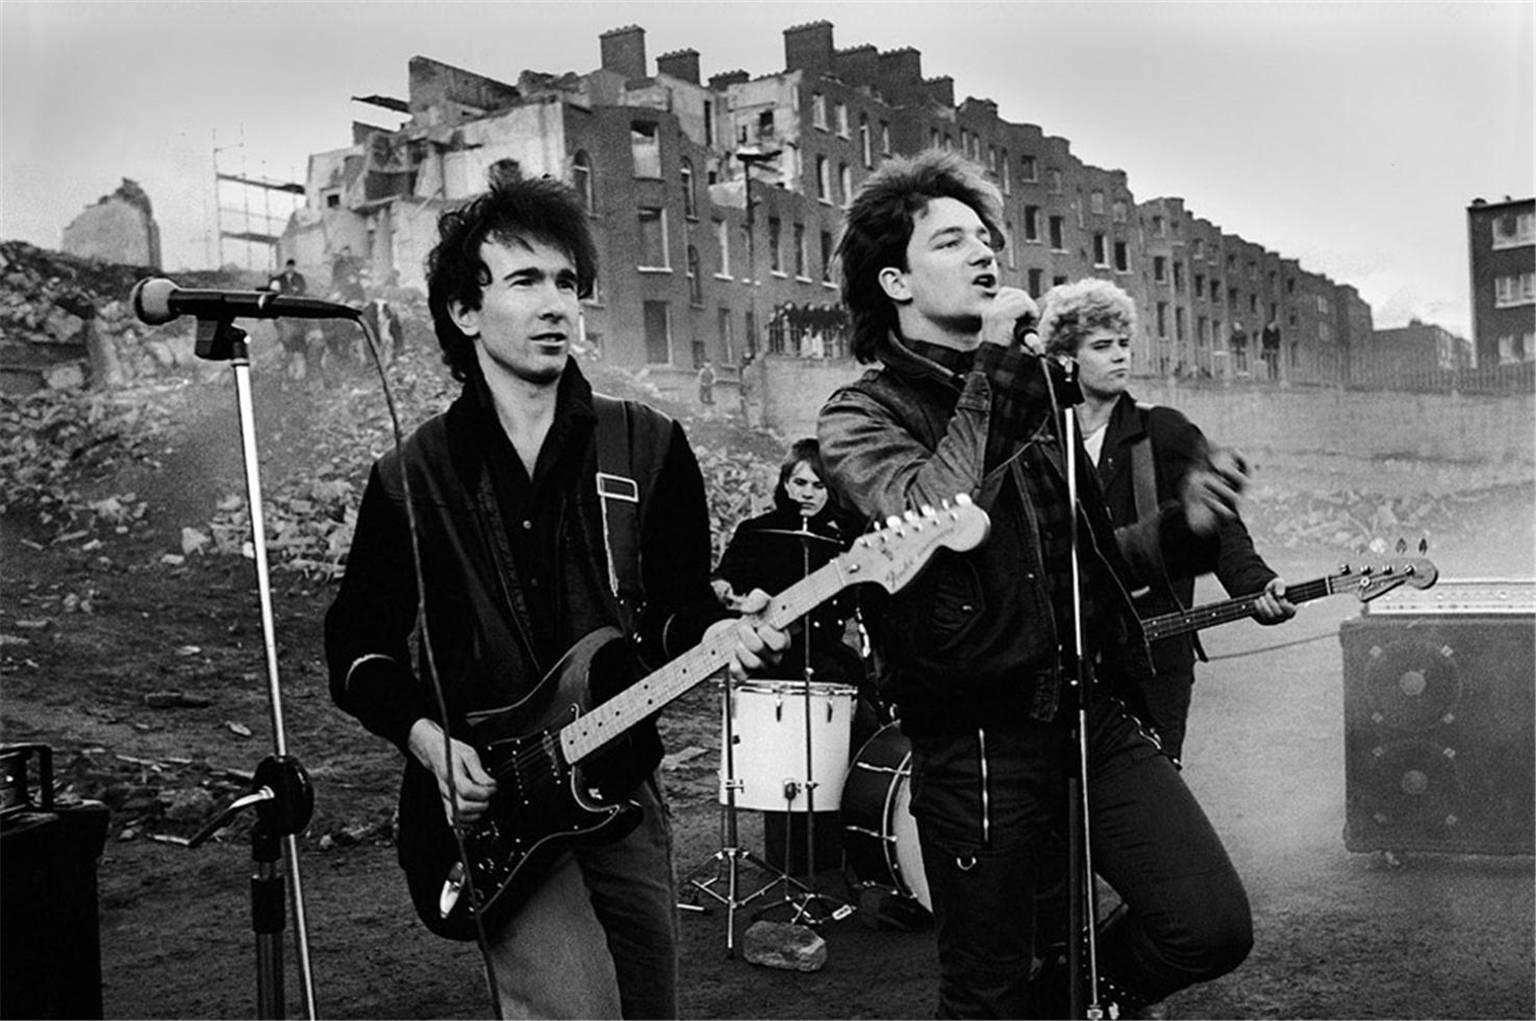 Colm Henry Black and White Photograph – U2 in Summerhill, Dublin City, Irland 1981